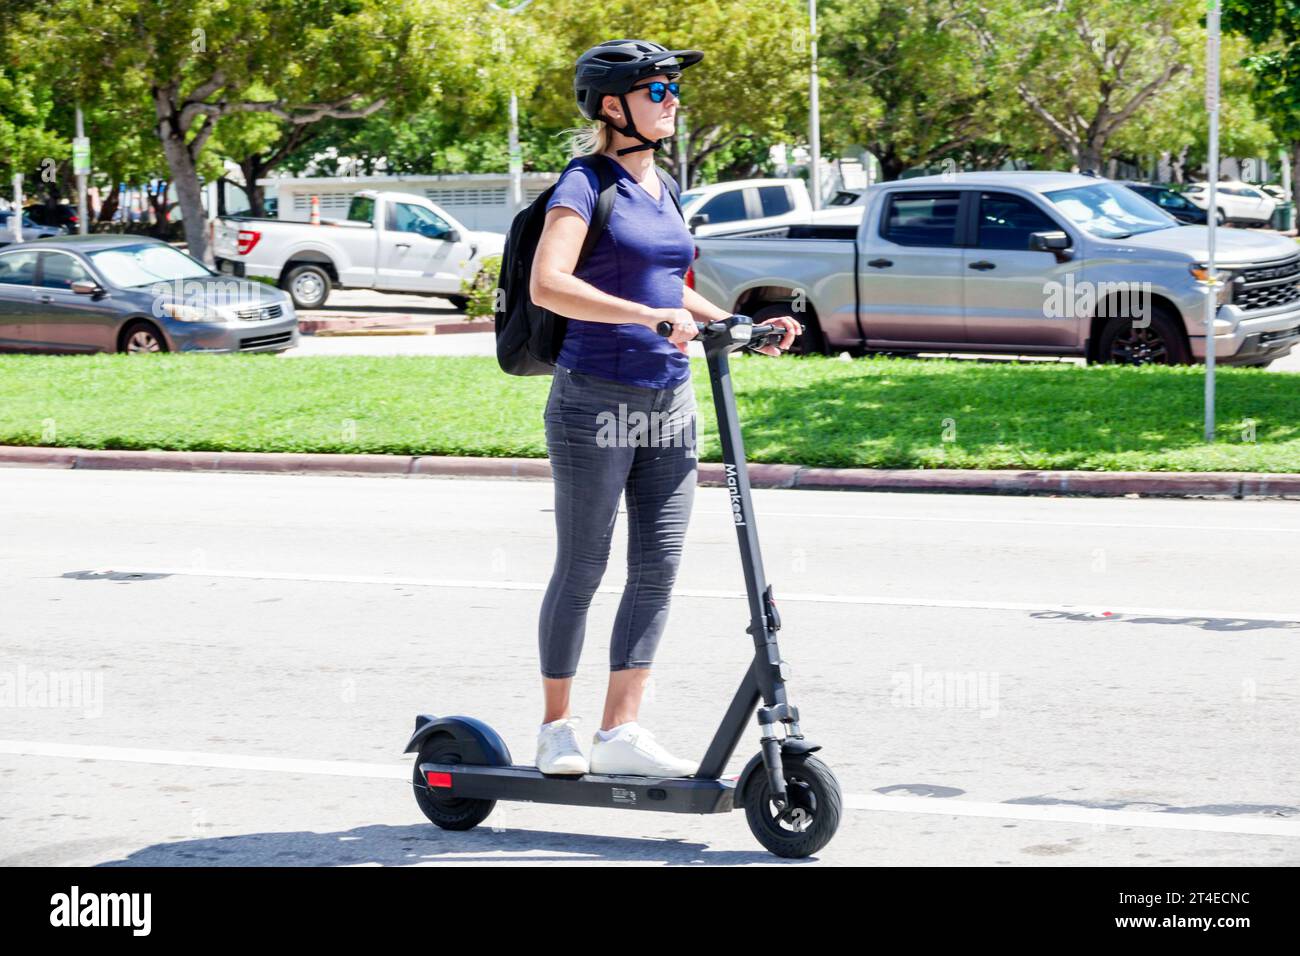 Miami Beach Florida,riding driving electric scooter,wearing safety helmet backpack street,woman women lady female,adult,resident Stock Photo